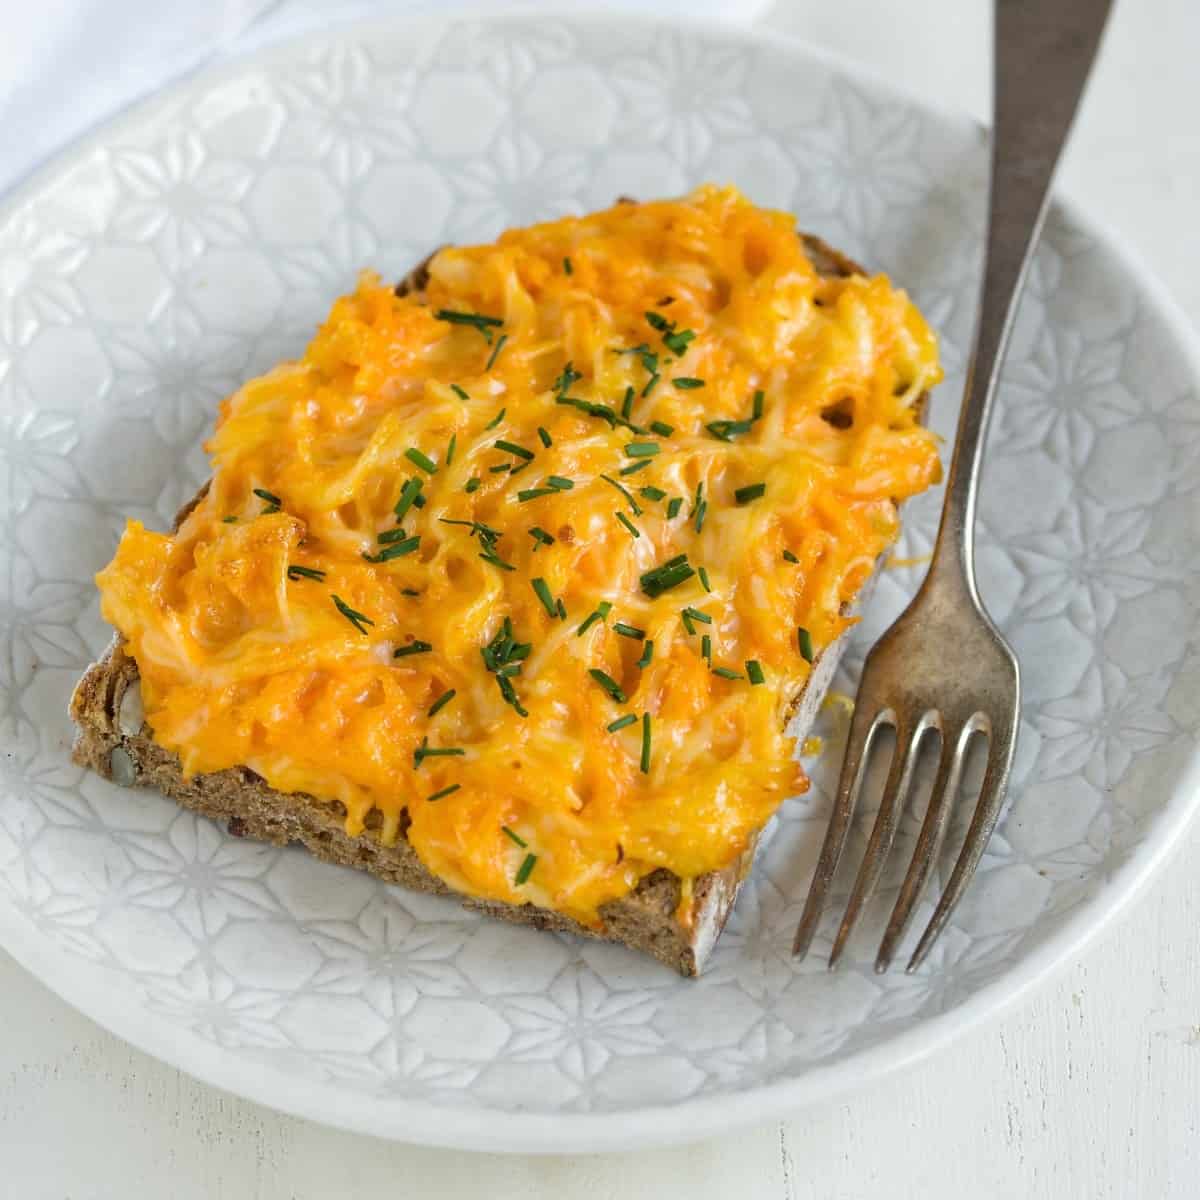 Open-faced sandwich with cheese carrot spread, broiled in the oven.